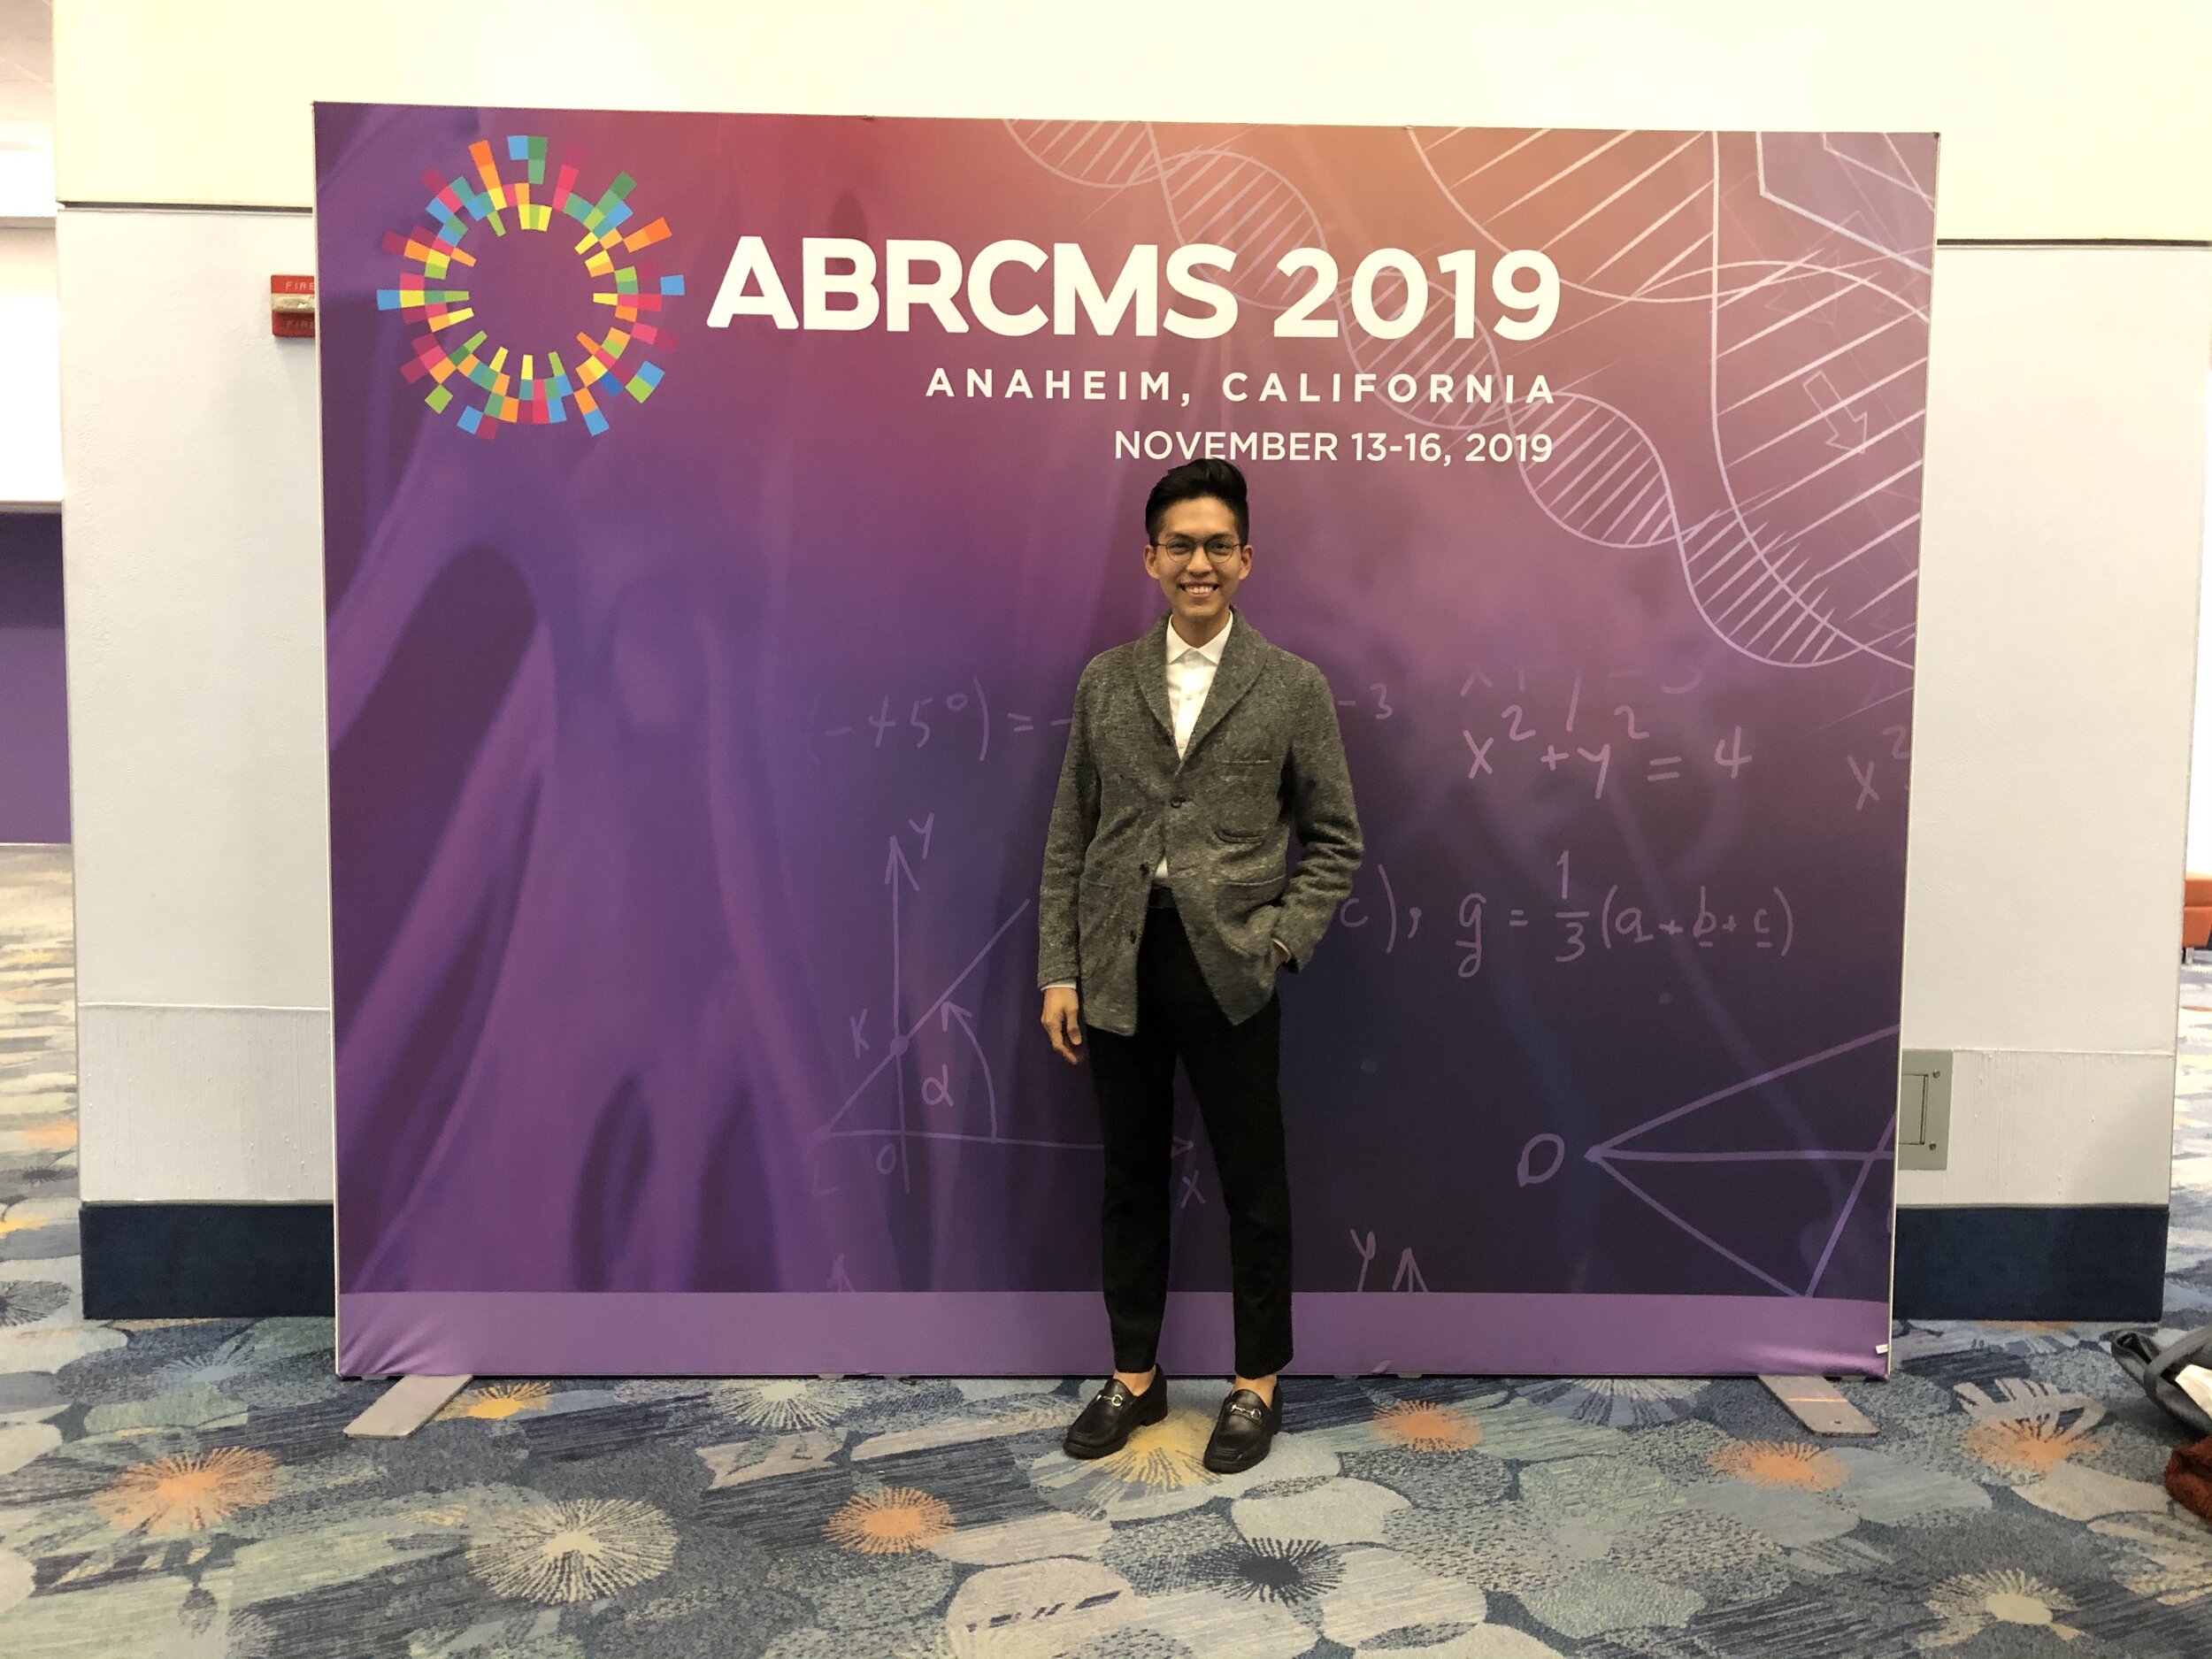 Stephen at the ABRCMS 2019!